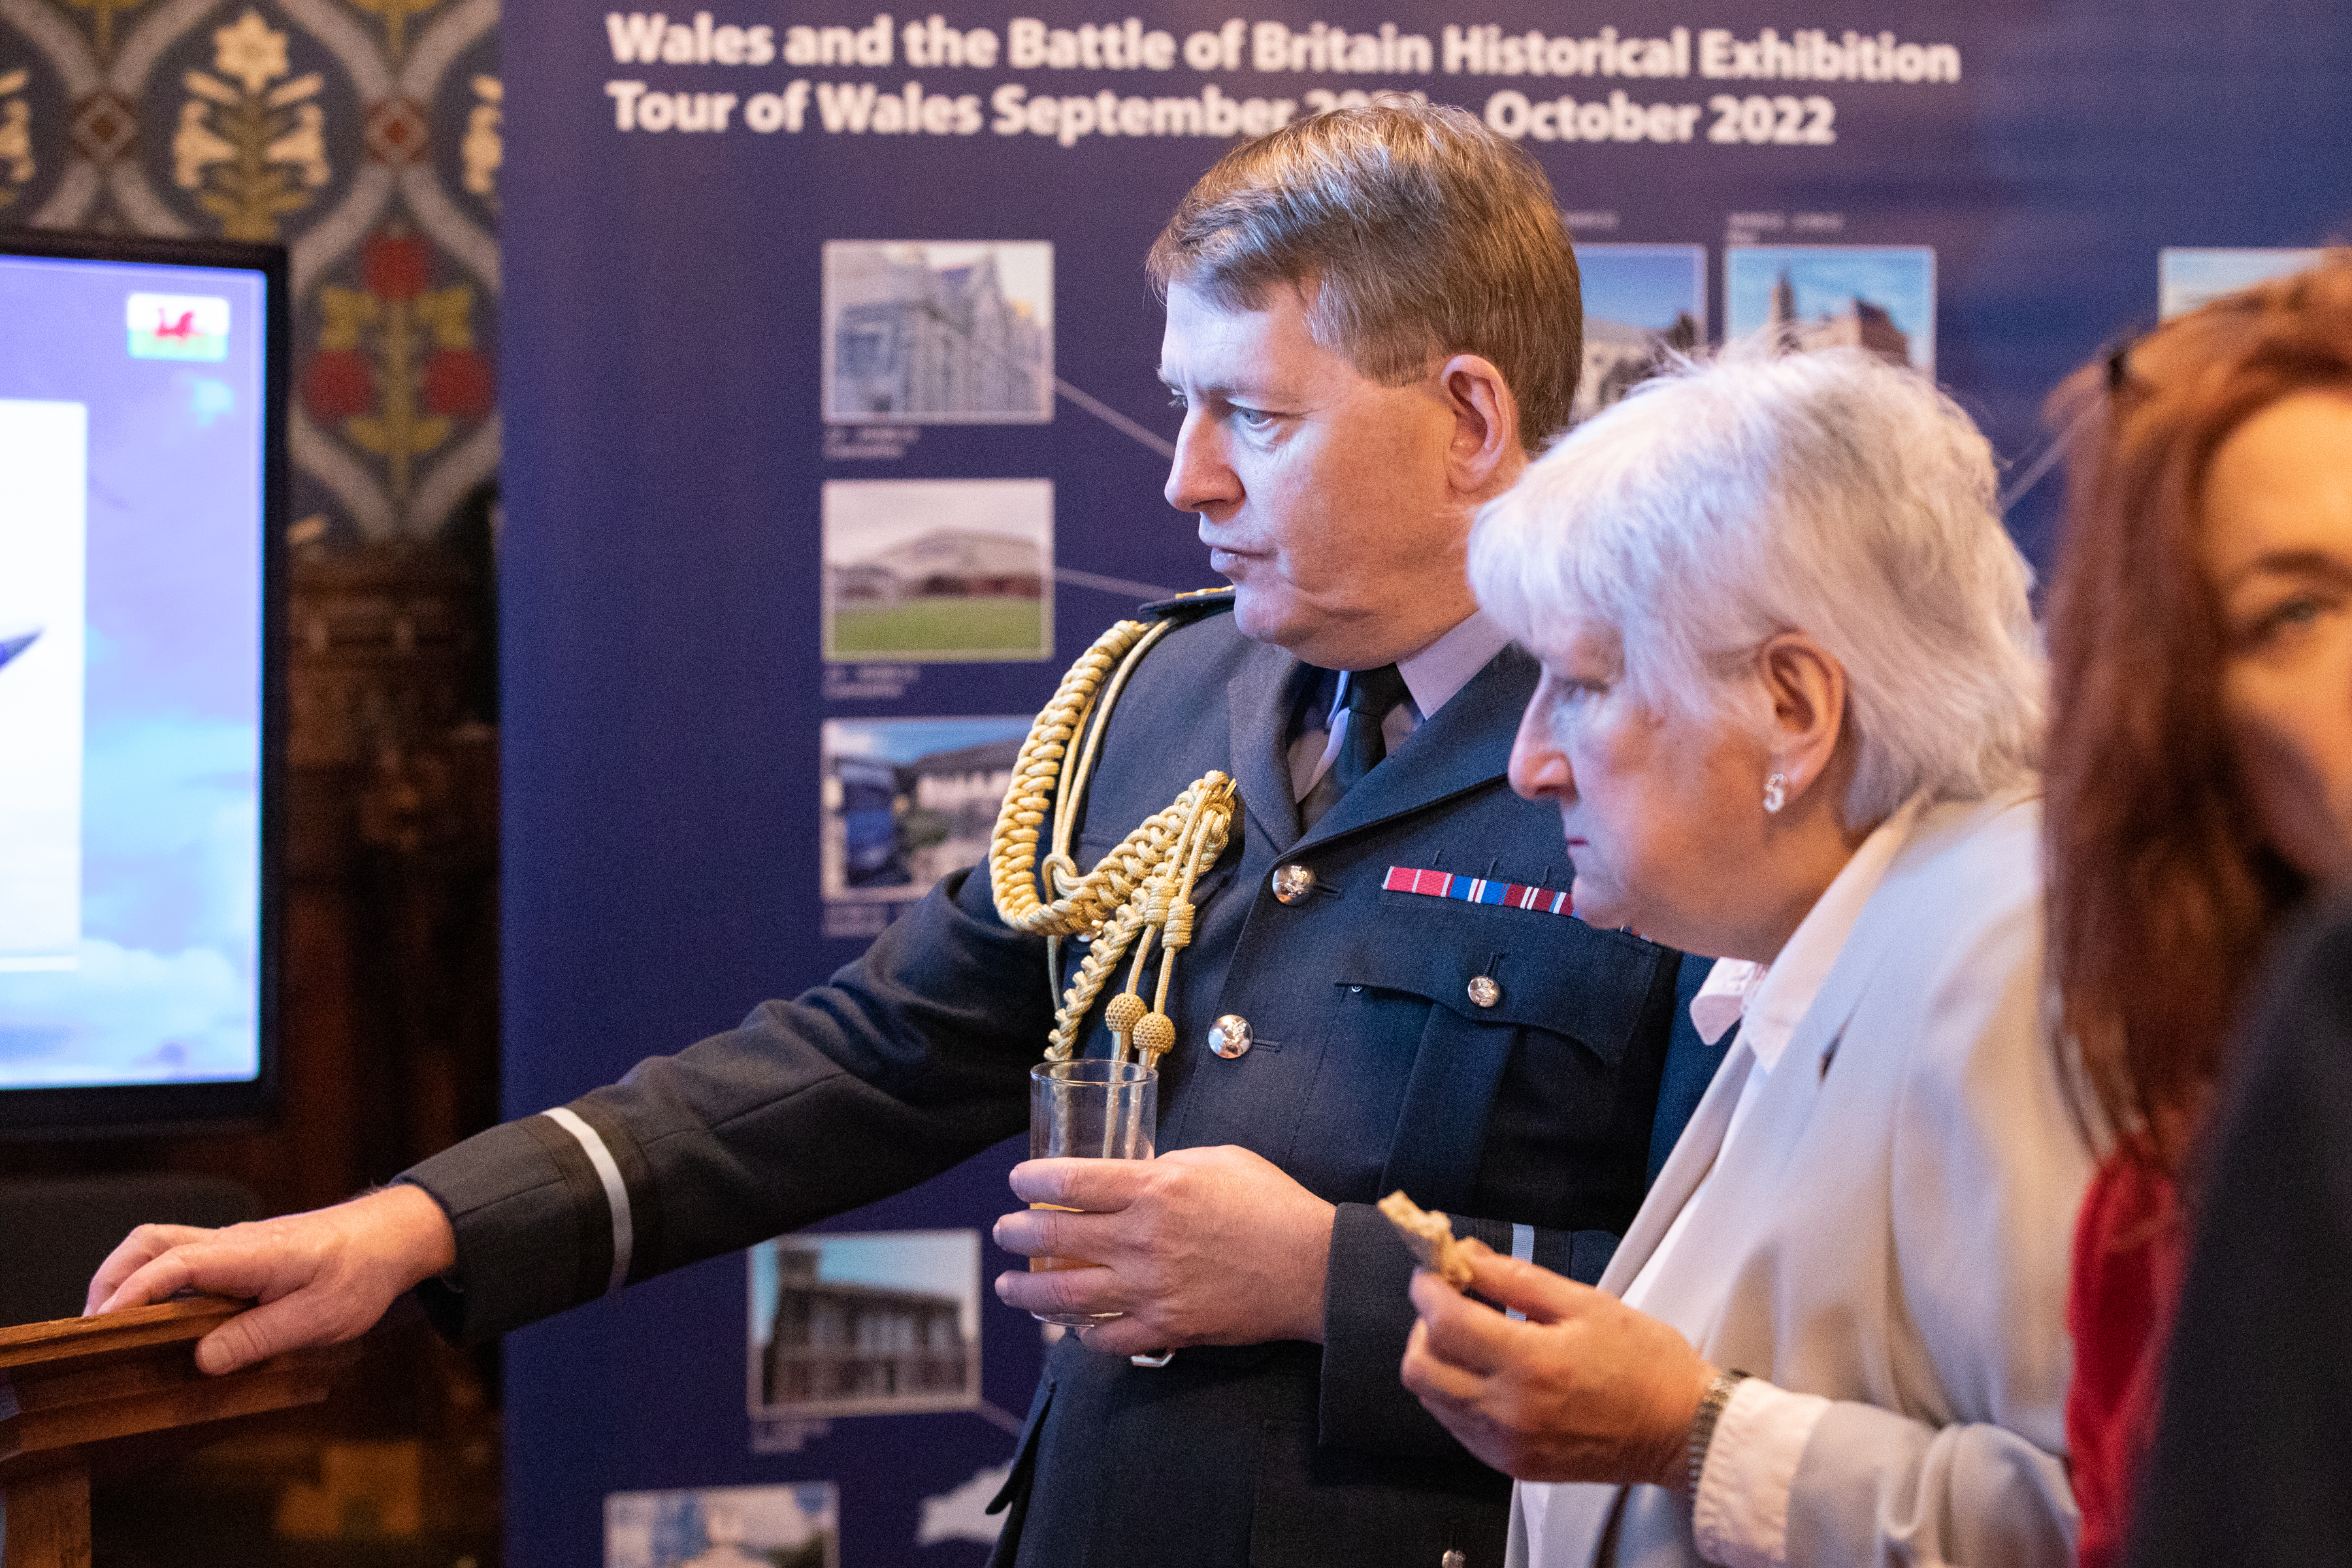 Image shows RAF aviator and civilian at exhibition.